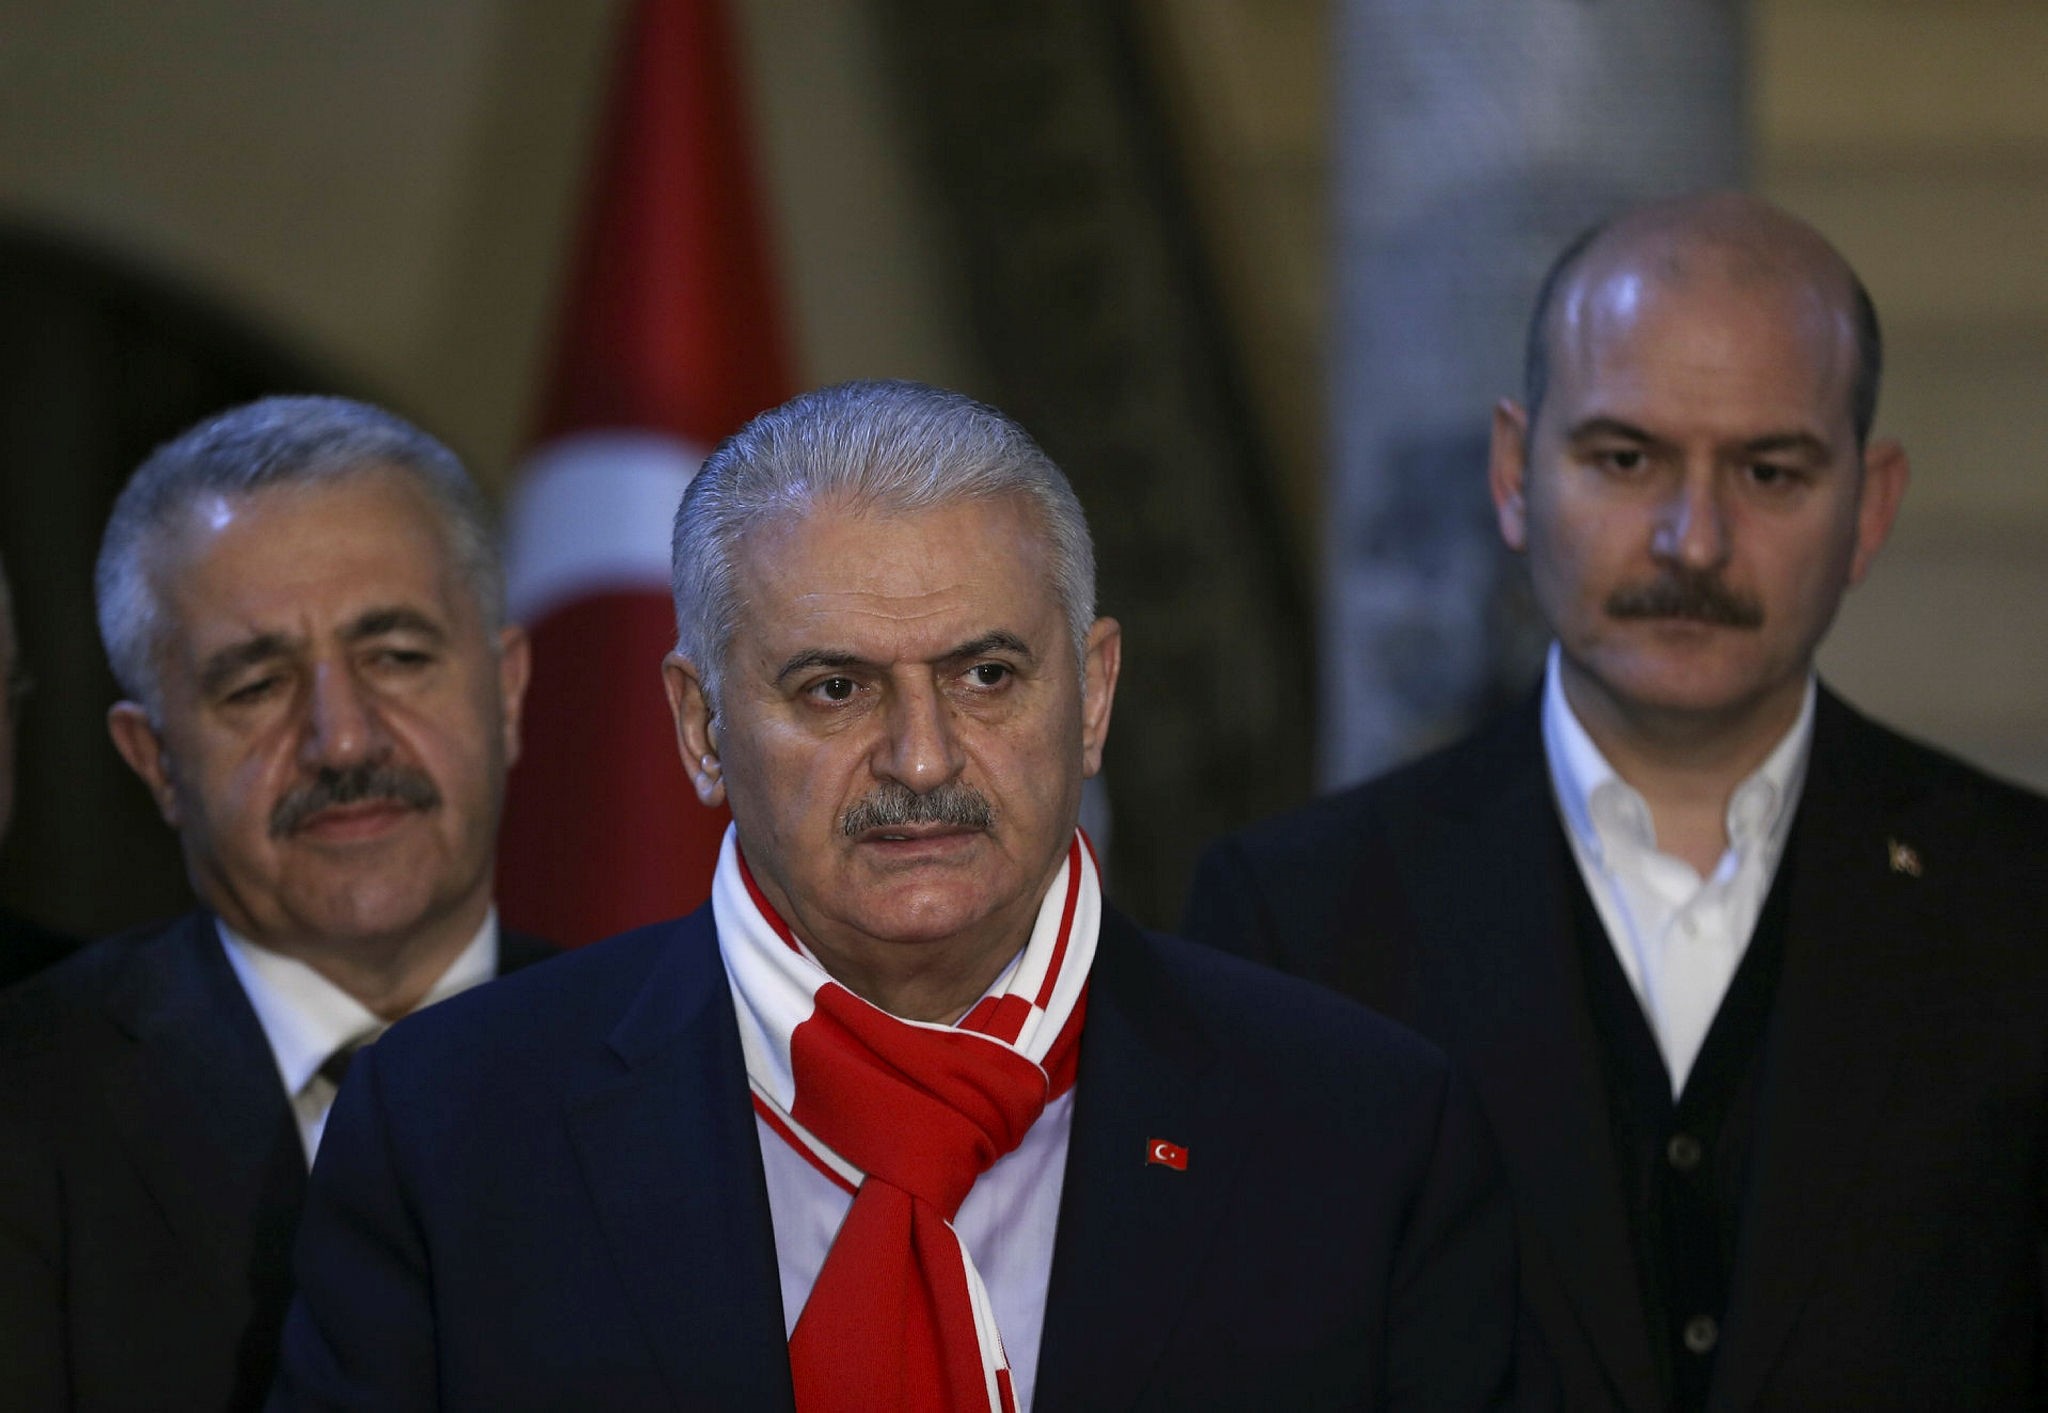 Minister of Transport, Maritime and Communication Ahmet Arslan (L), PM Yu0131ldu0131ru0131m (C) and Interior Minister Su00fcleyman Soylu stand during the Premier's speech in front of Kilis Governor's Office, February 4, 2018 (AA Photo)